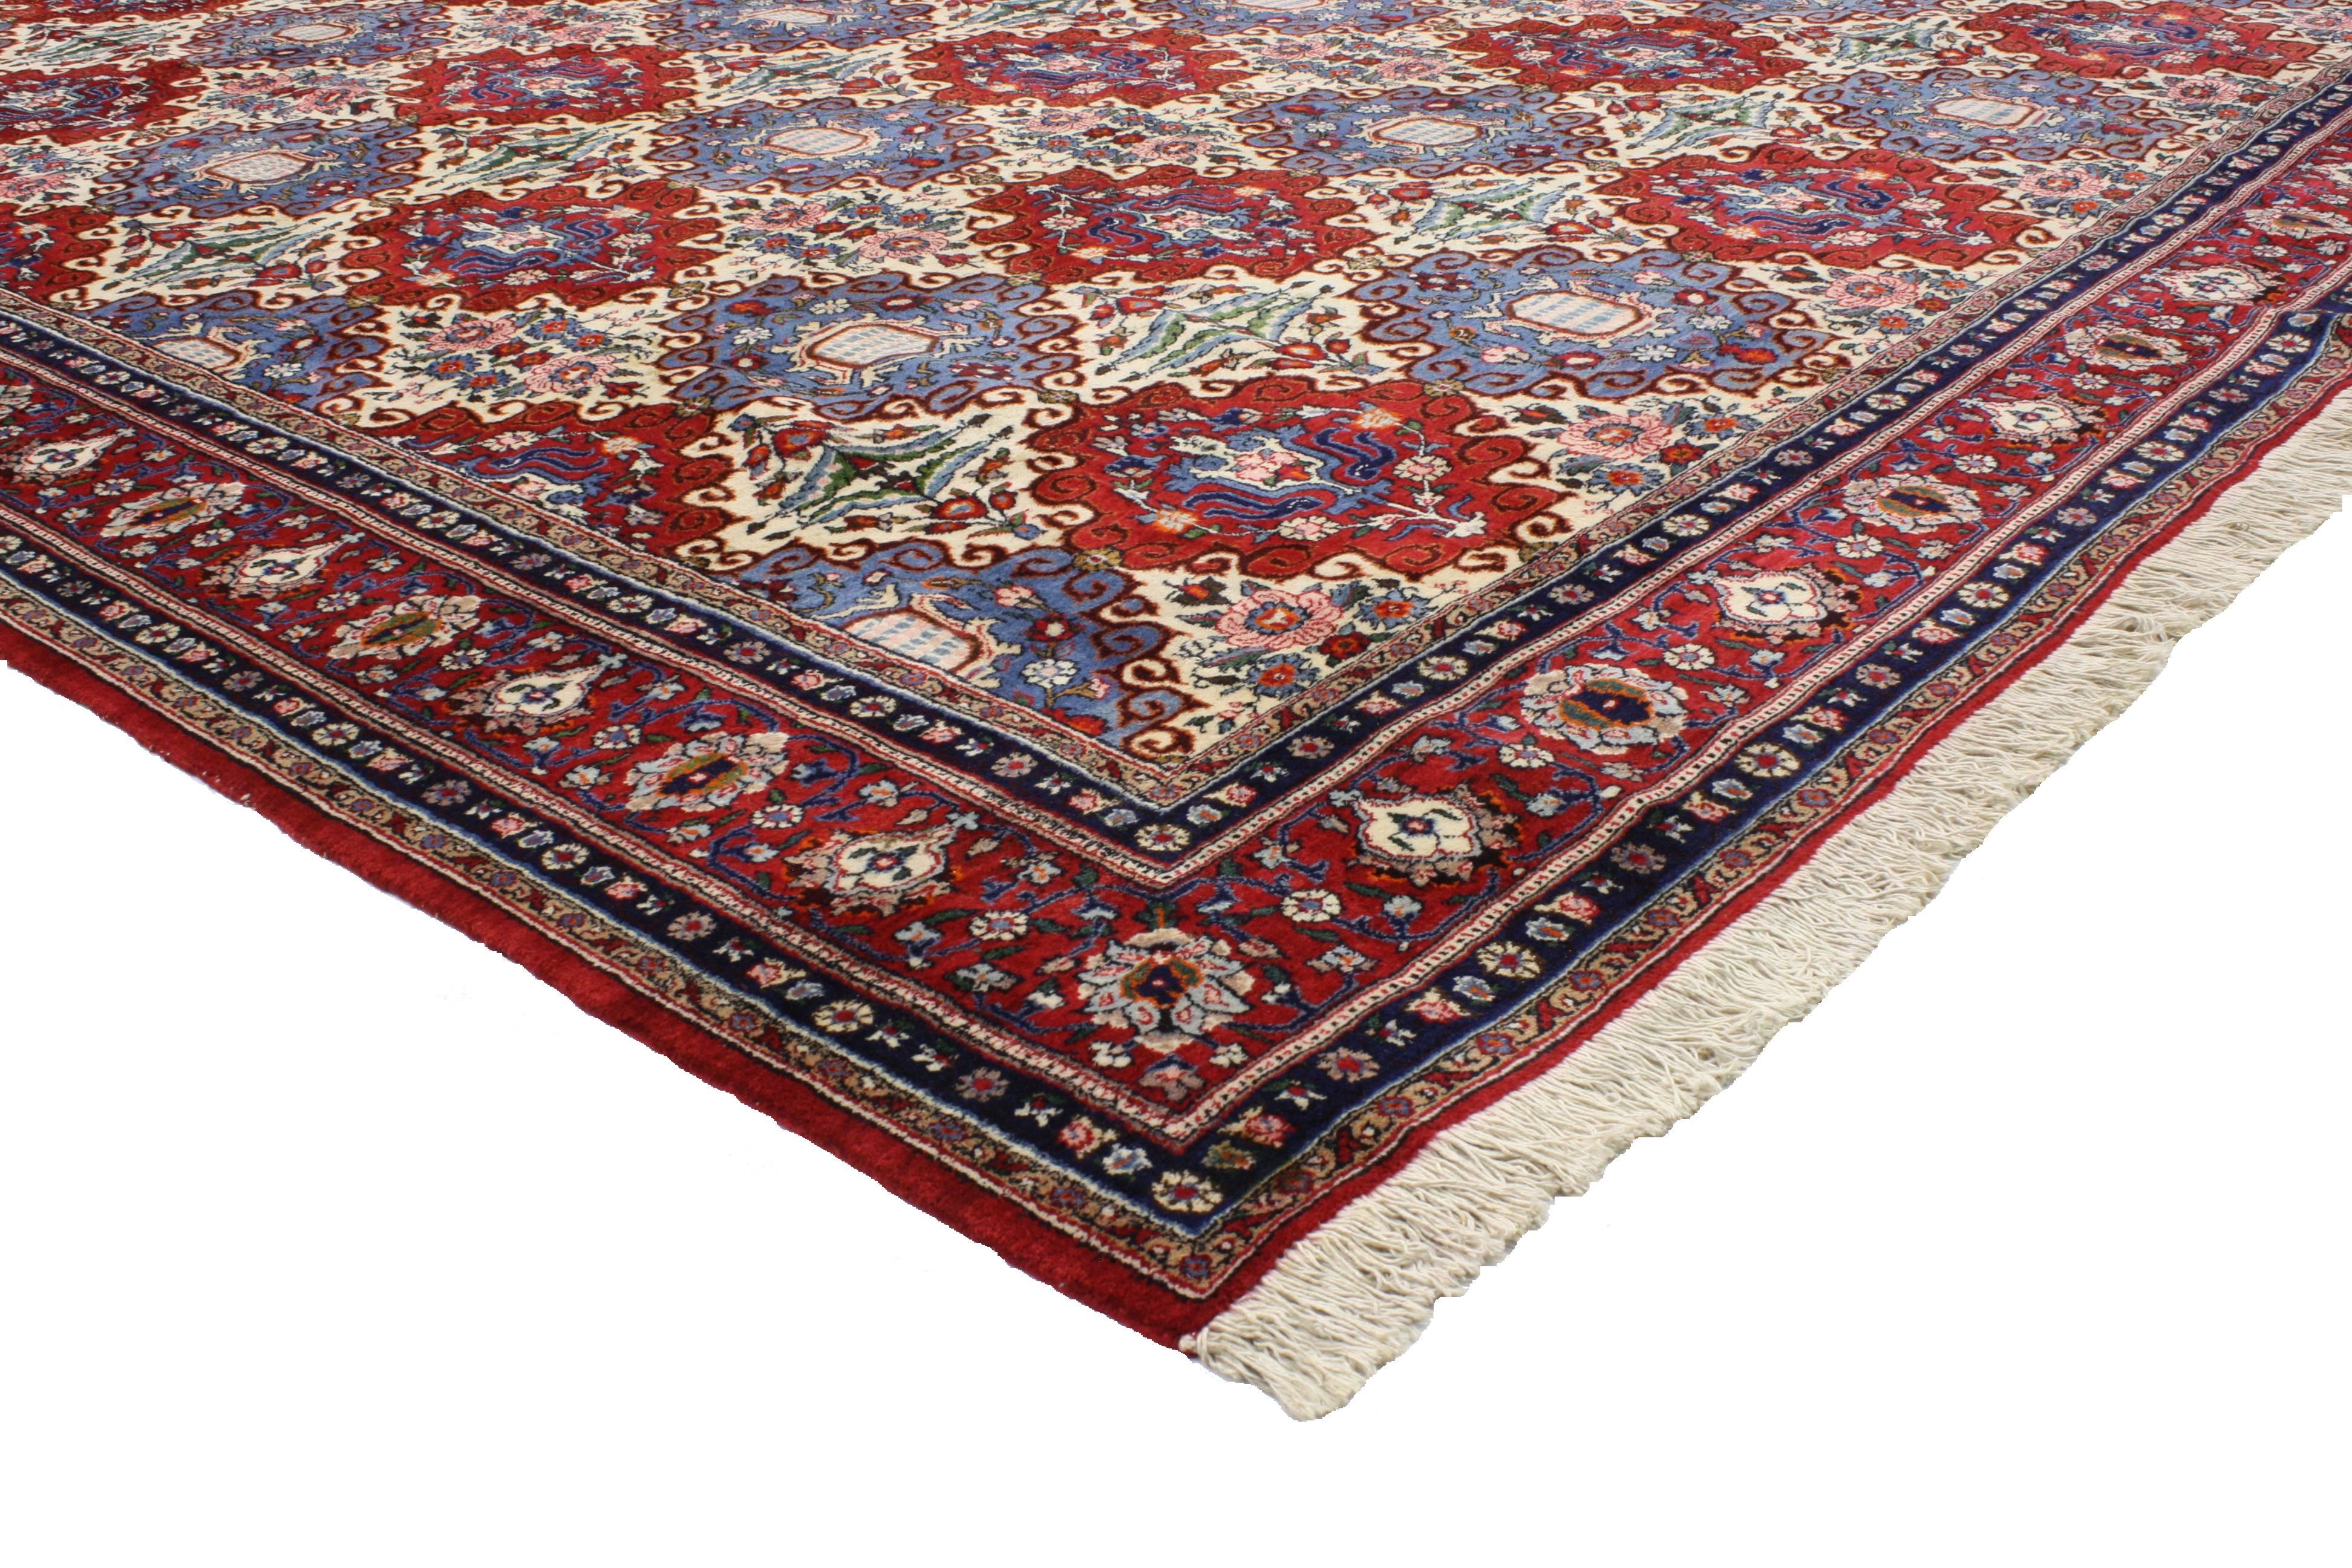  76779 Vintage Persian Moud Mood Rug with New England Cape Cod Style 09'06 x 12'07. With its timeless elegance and defining colors, evoke the charming New England Cape Cod style with this this hand-knotted wool vintage Persian Moud Mood rug. The